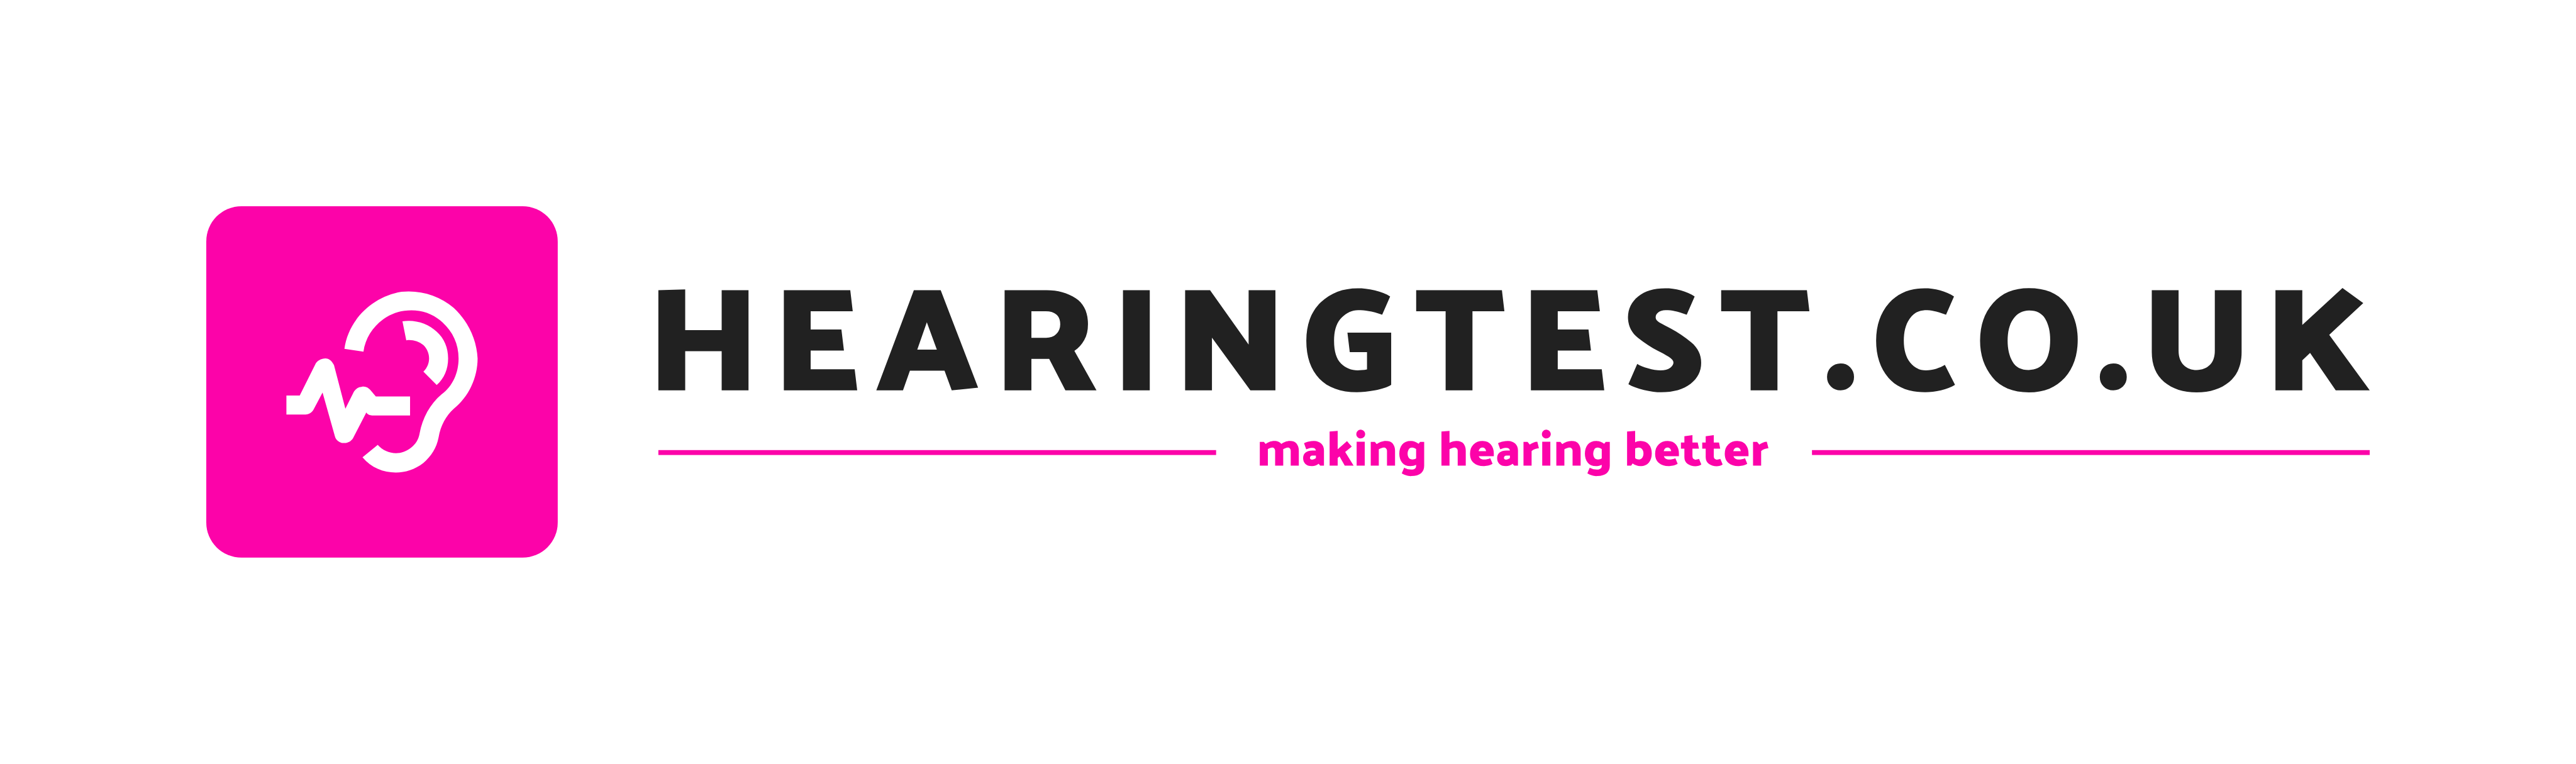 Free Hearing Test for Adults in Kents Bank | Hearingtest.co.uk